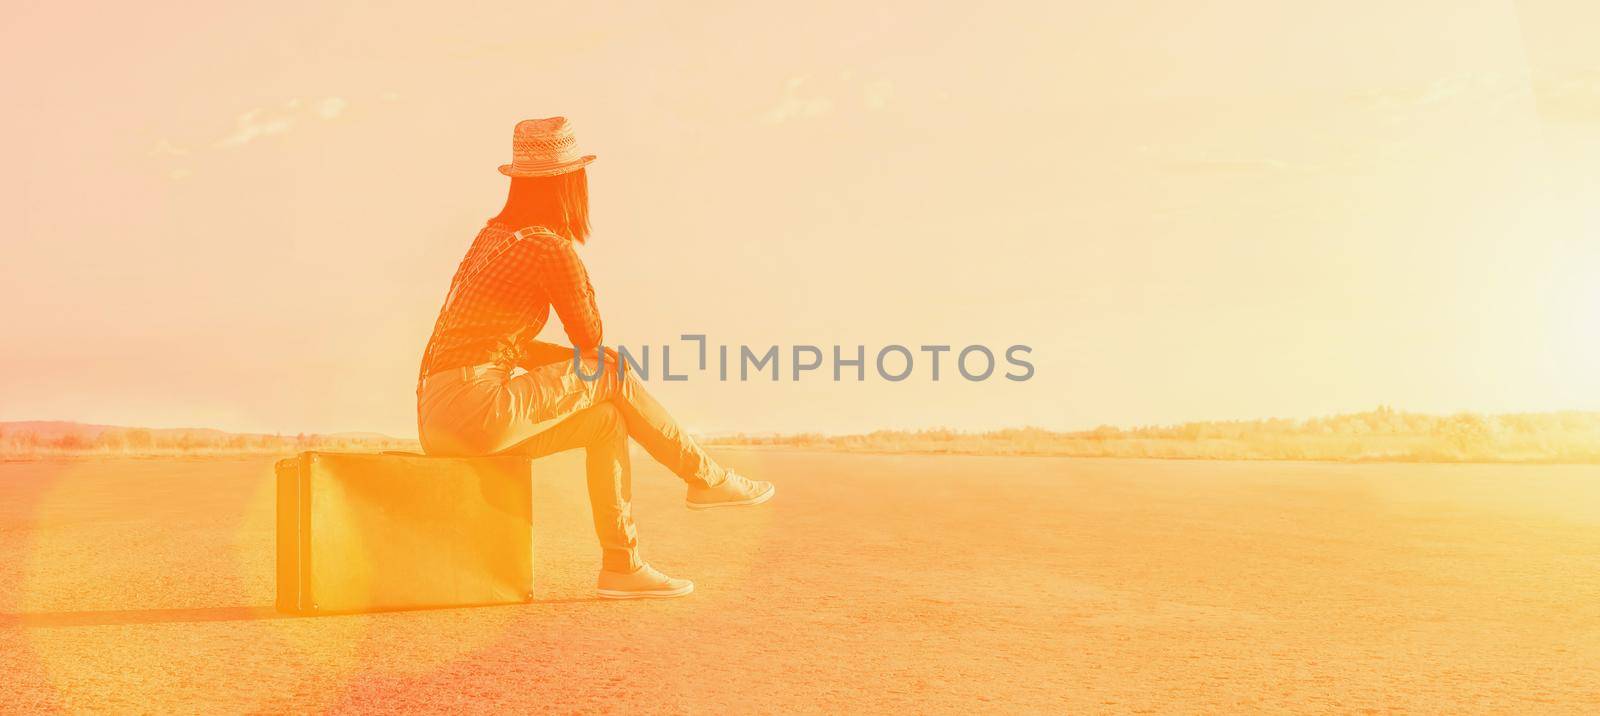 Traveler woman sits on a suitcase and looks away on road. Image with sunlight effect